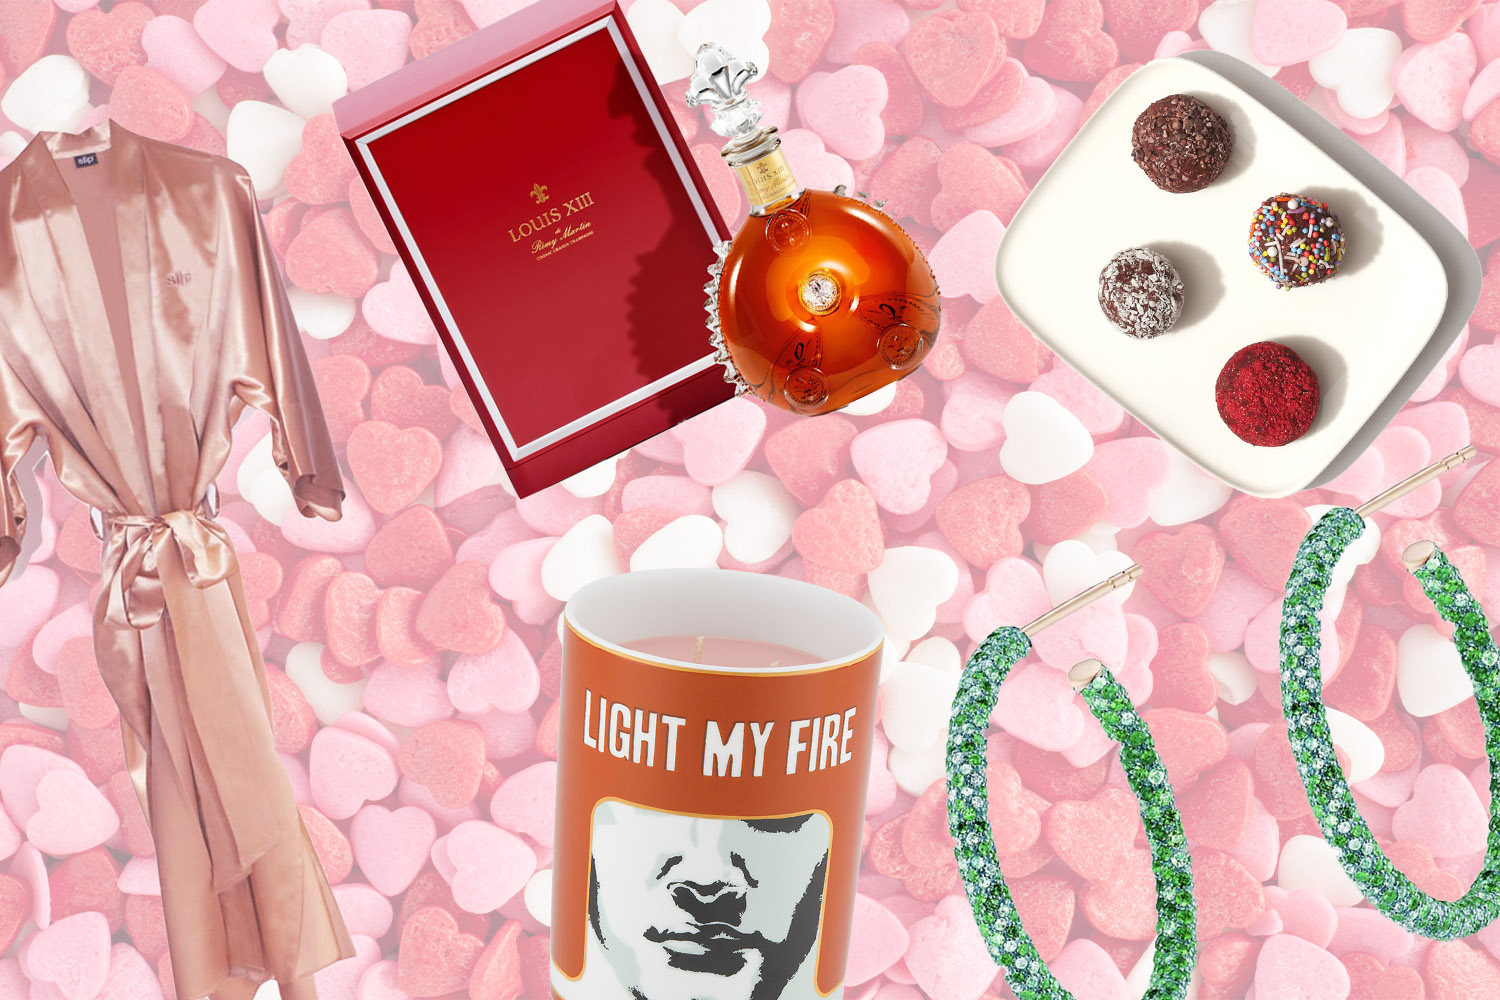 Louis Vuitton Valentine's Day 2022 Collection & why I don't like it 